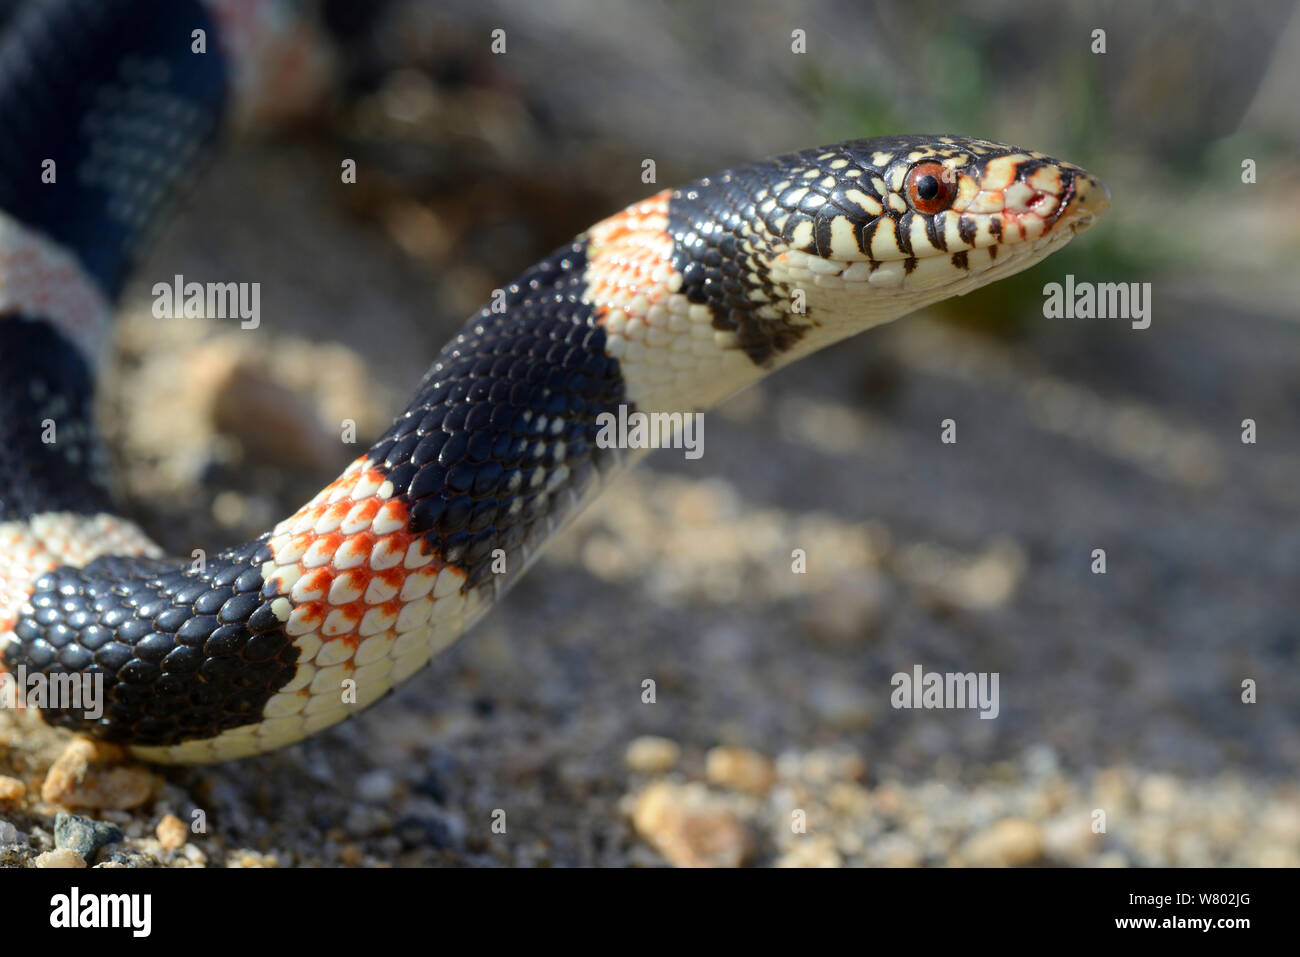 Long-nosed snake (Rhinocheilus lecontei) portrait, Panamint mountains, Death Valley National Park, California, USA. May. Stock Photo